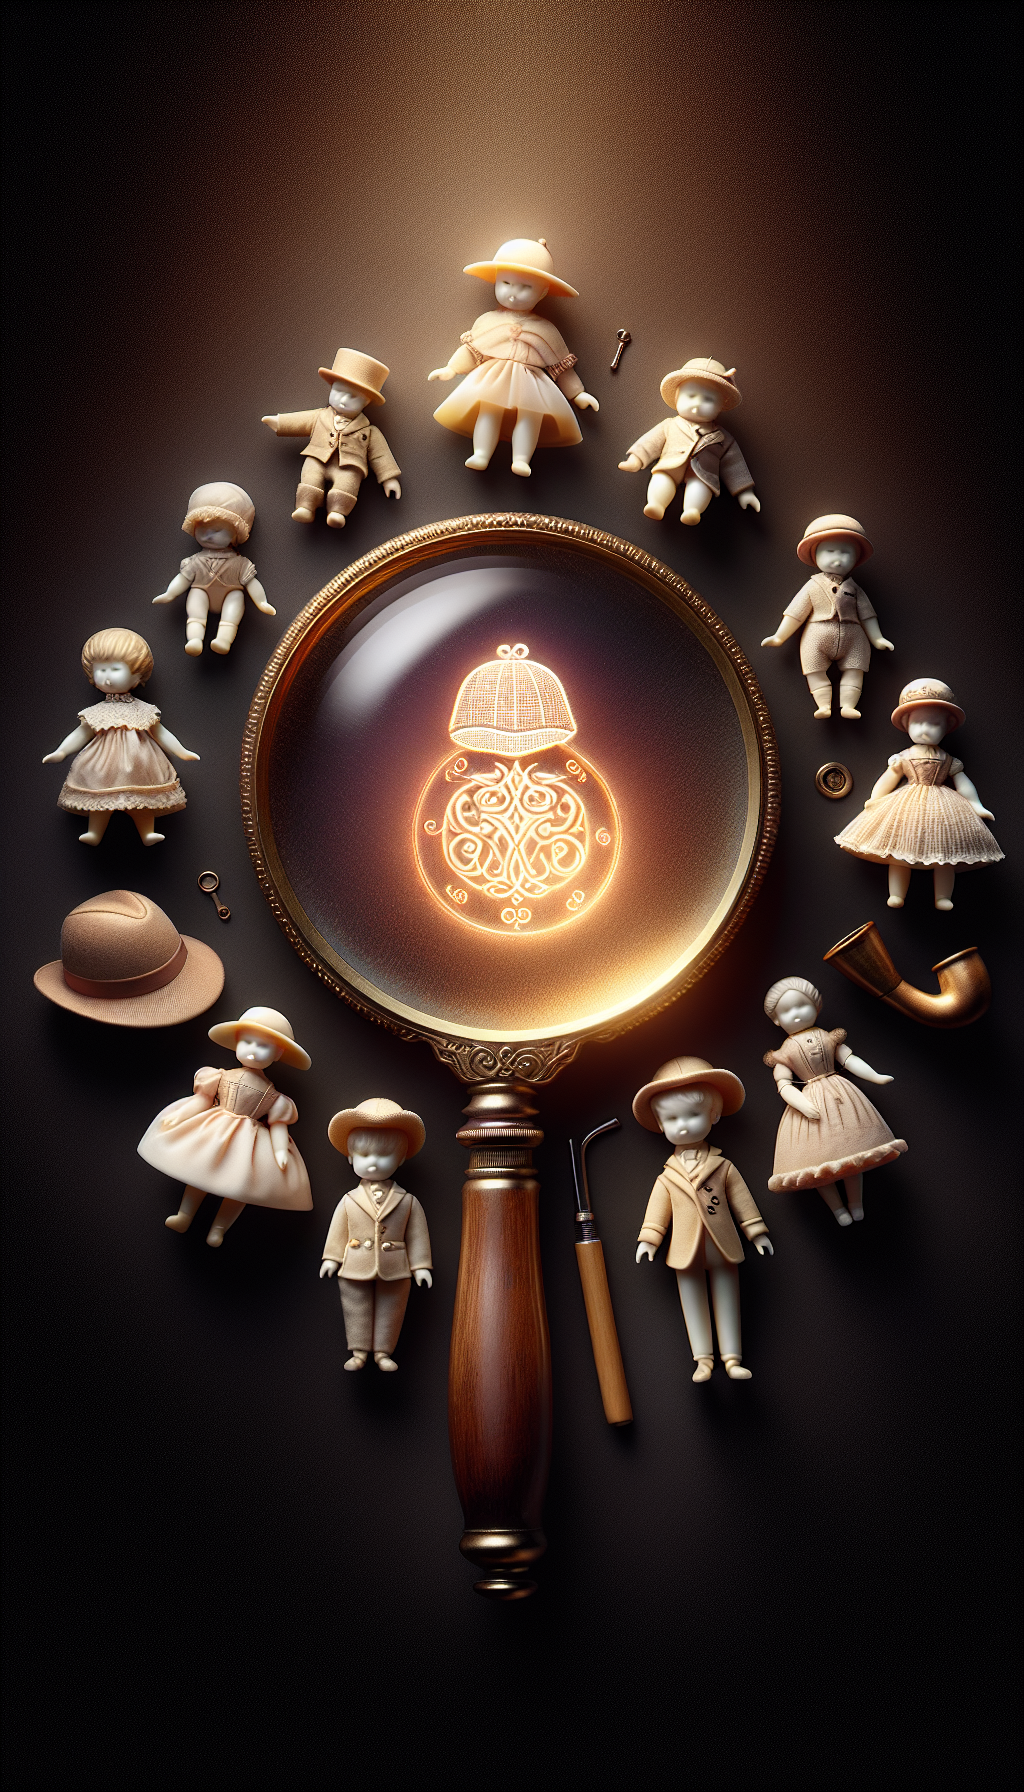 An intricately detailed magnifying glass centers the illustration, framed by a variety of antique dolls each with a distinct, stylized maker's mark glowing subtly at their bases. The magnifying lens, etched with a Sherlock Holmes-style cap and pipe, reveals a close-up of a doll's porcelain neck where tiny, elegant initials — the key to its craft heritage — are inscribed.